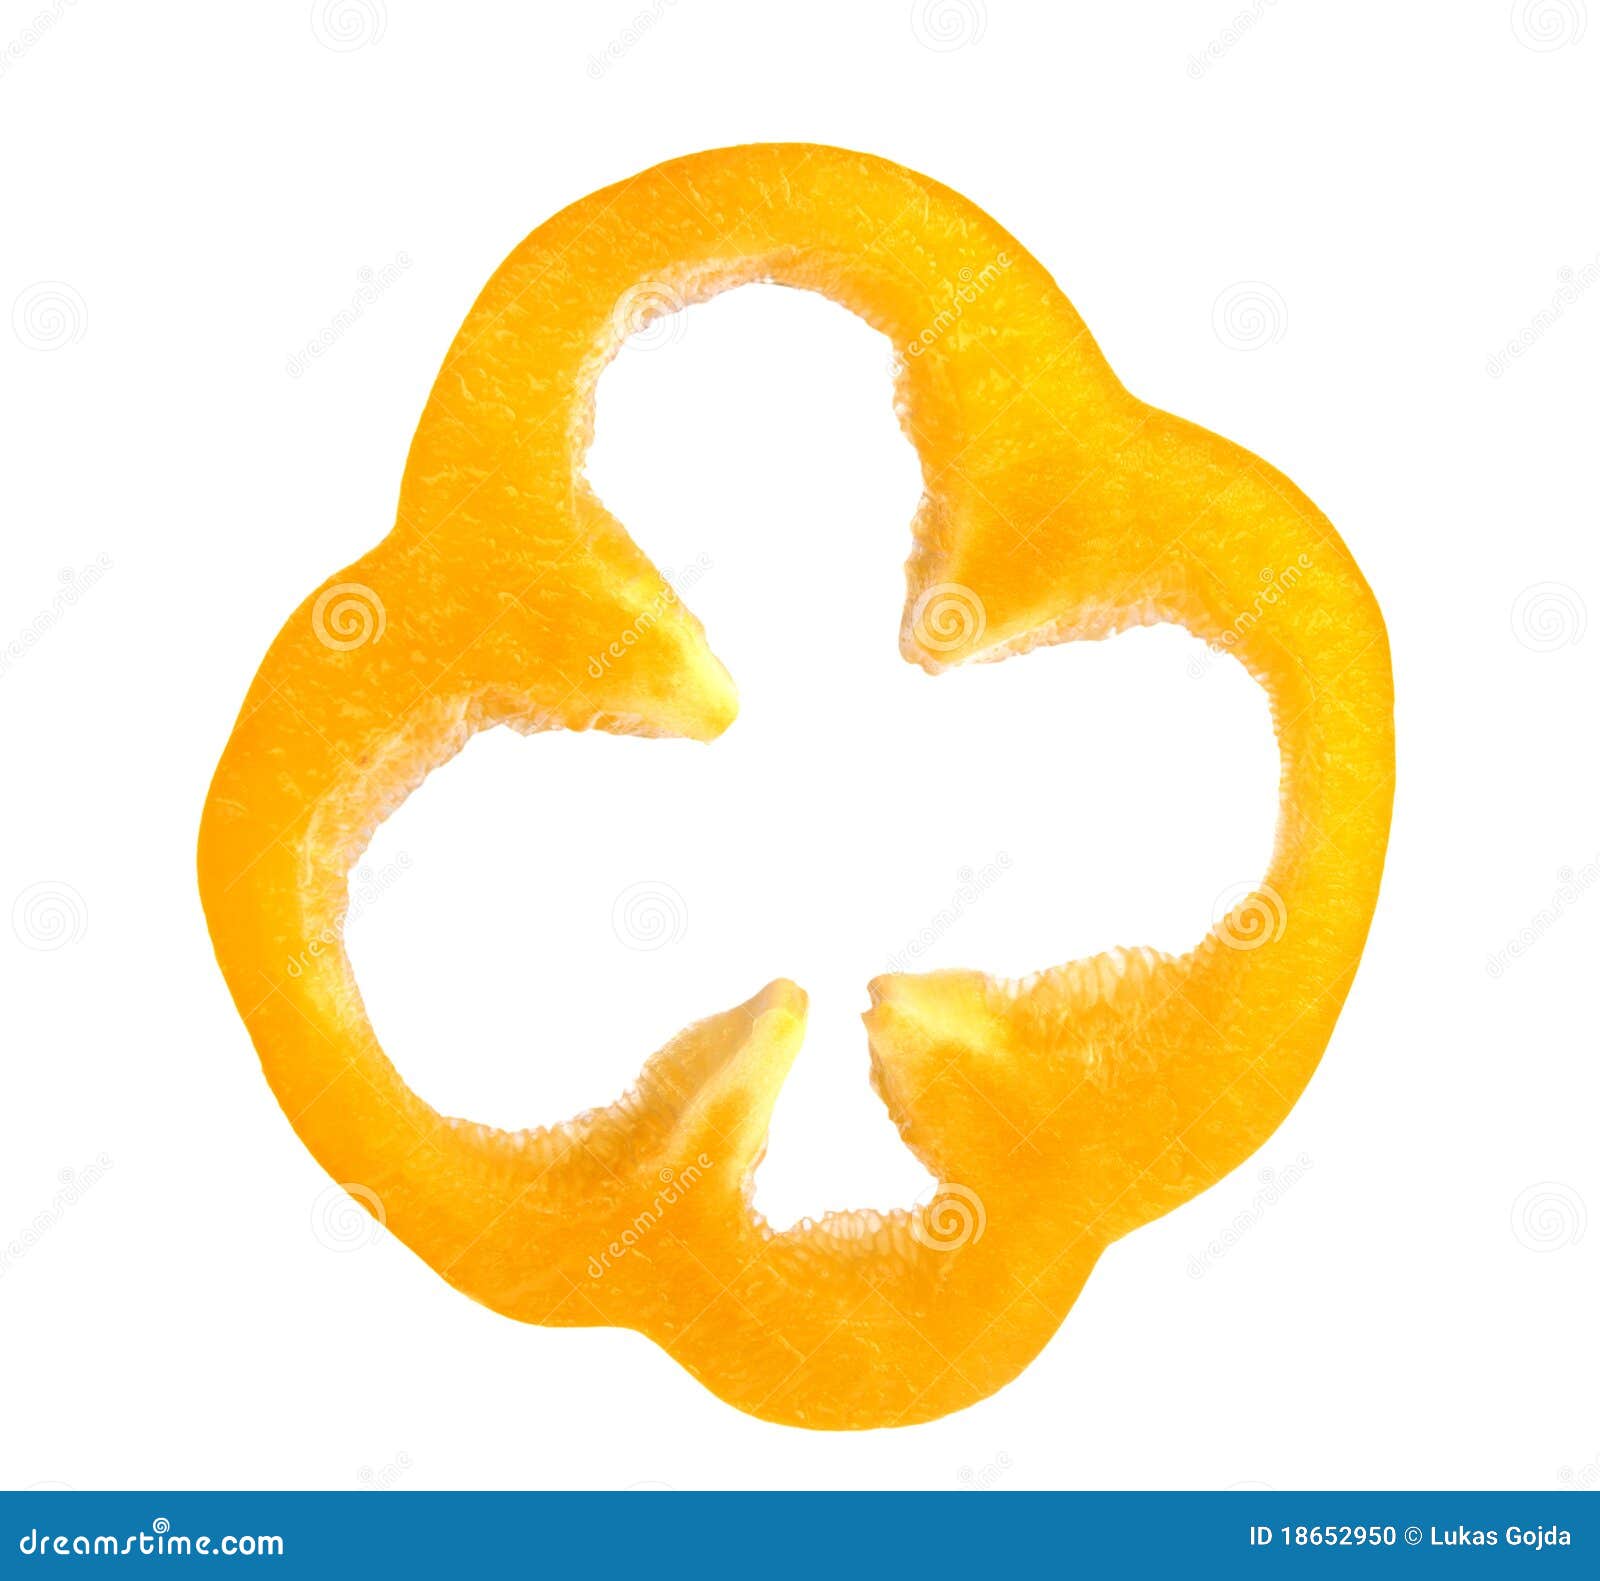 yellow pepper clipart - photo #15